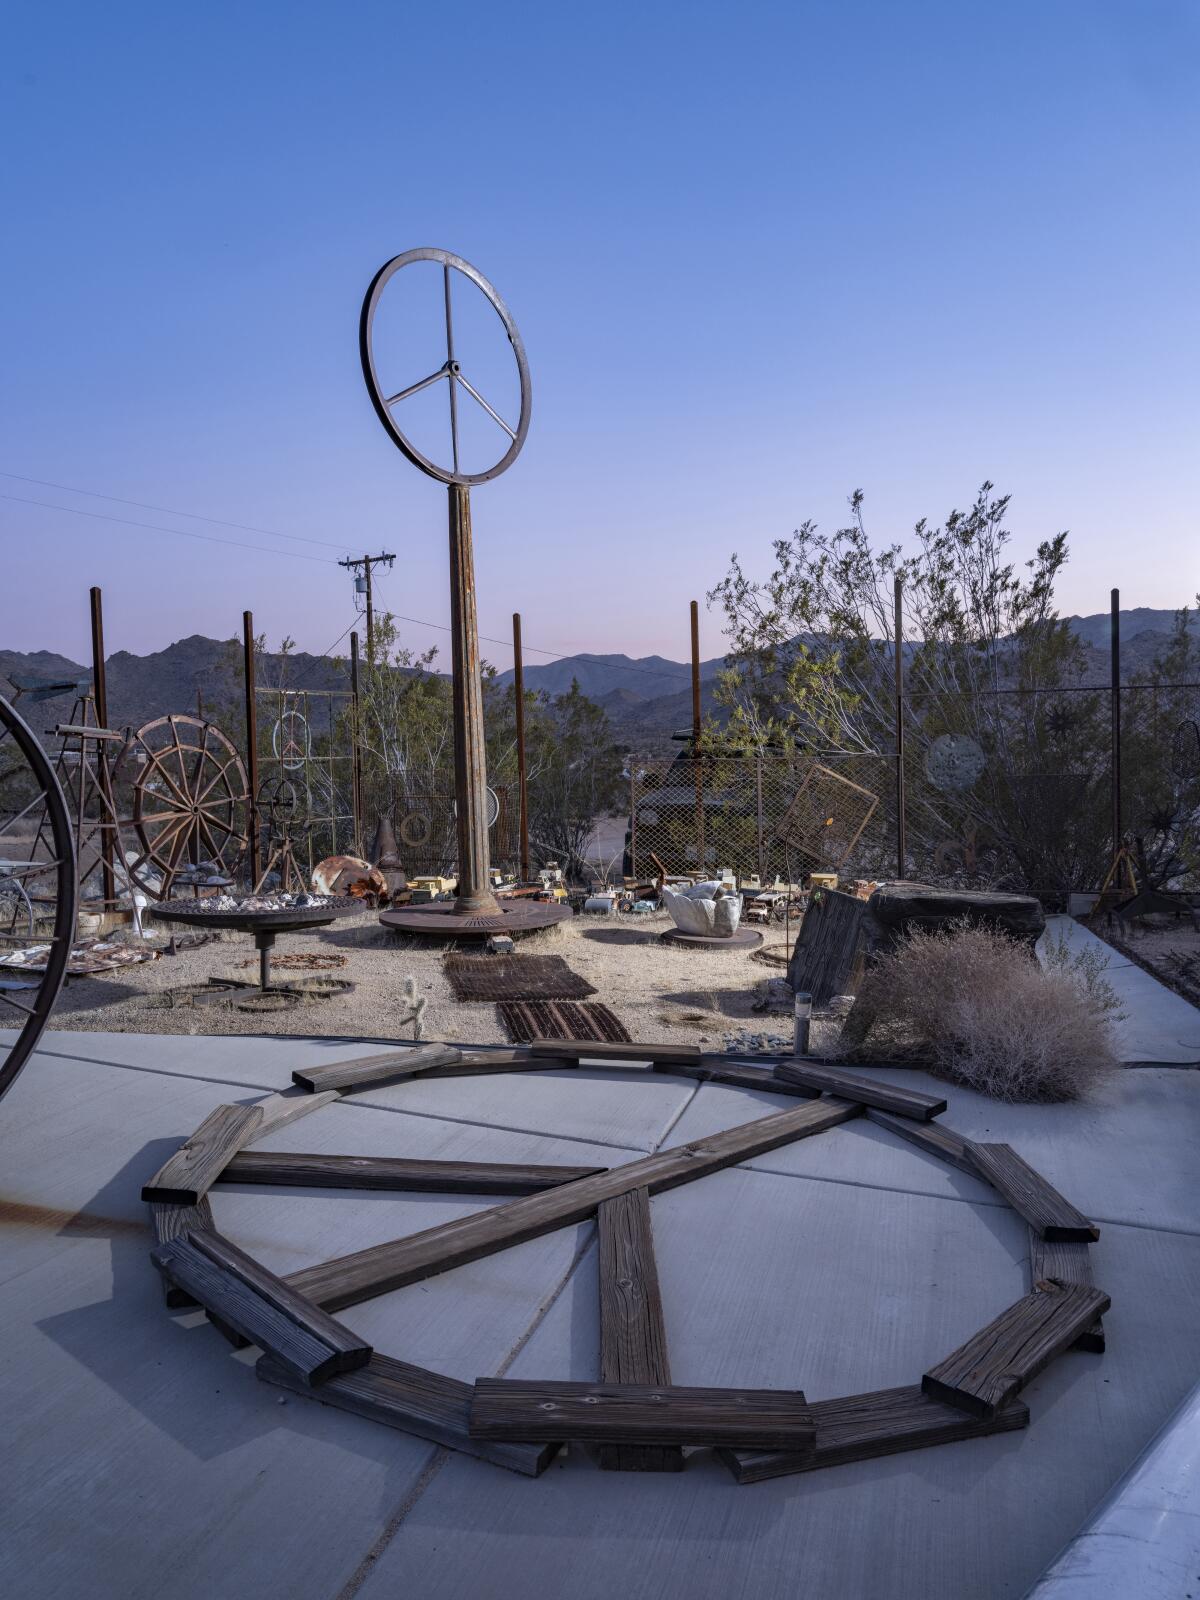 Peace signs and other art by Bobby Furst in a desert garden